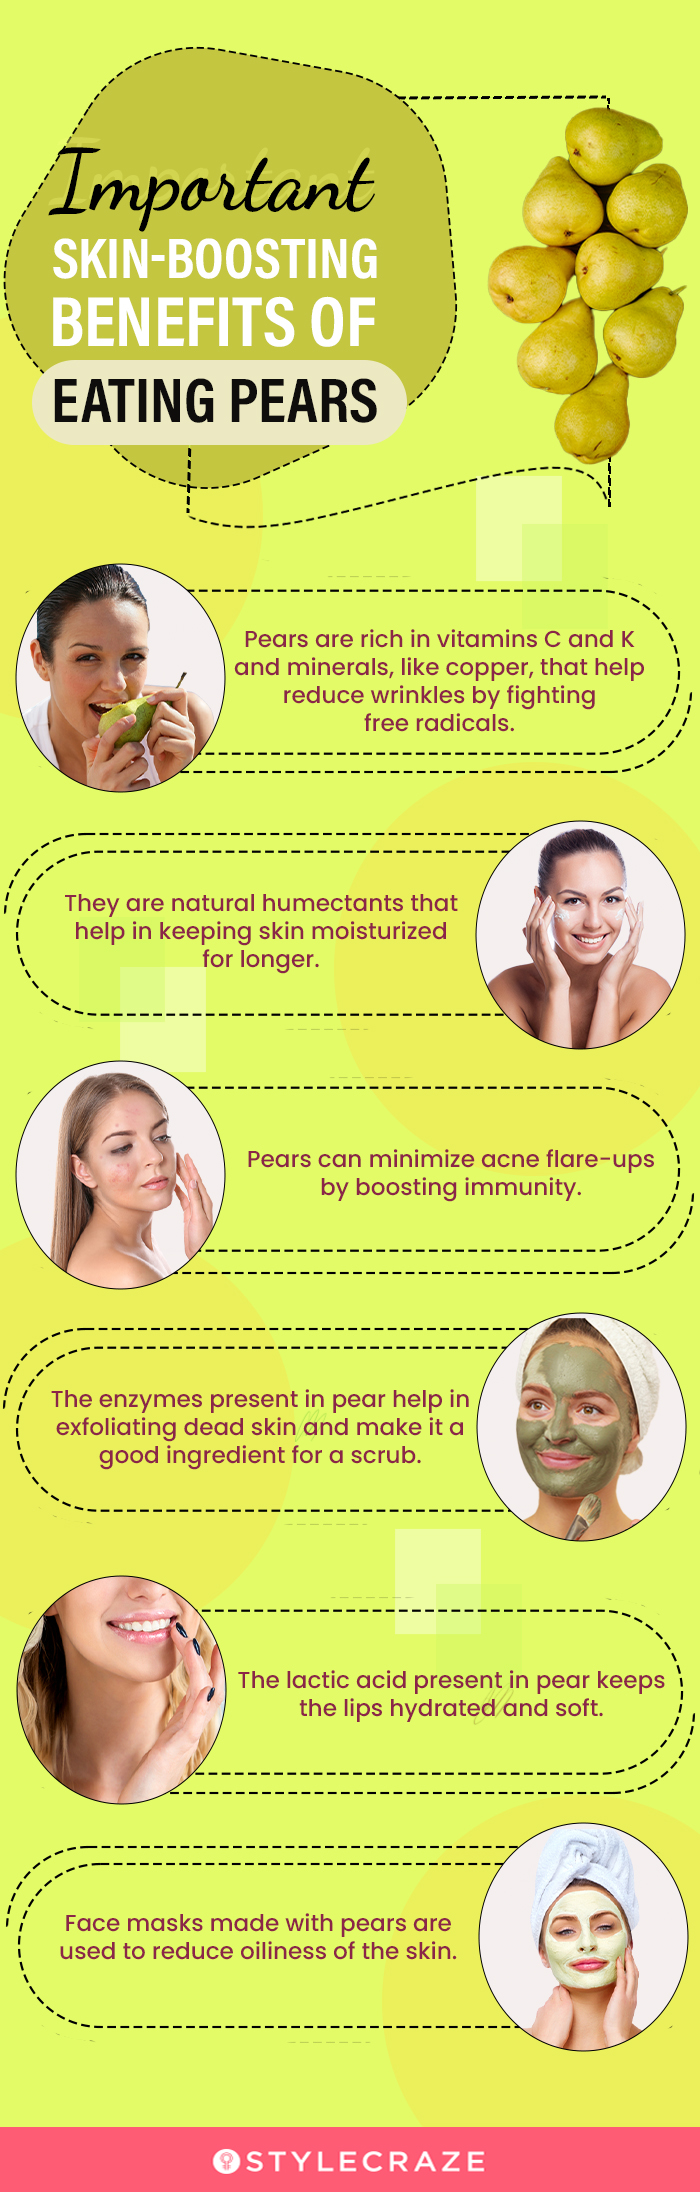 important skin boosting benefits of eating pears [infographic]